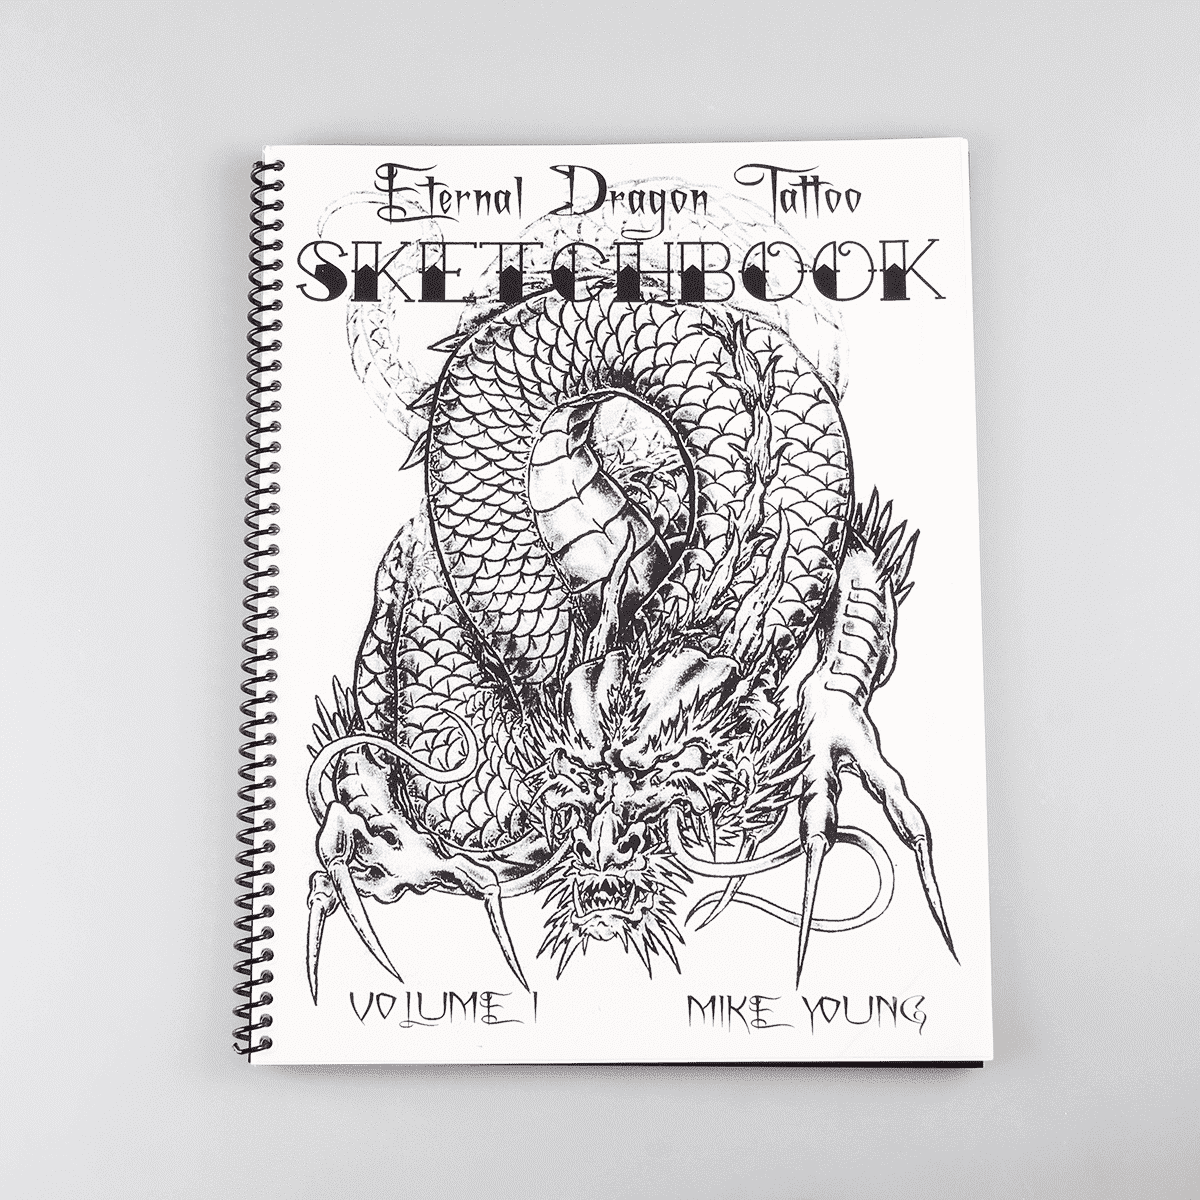 Eternal Dragon Tattoo Sketchbook vol. I by Mike Young